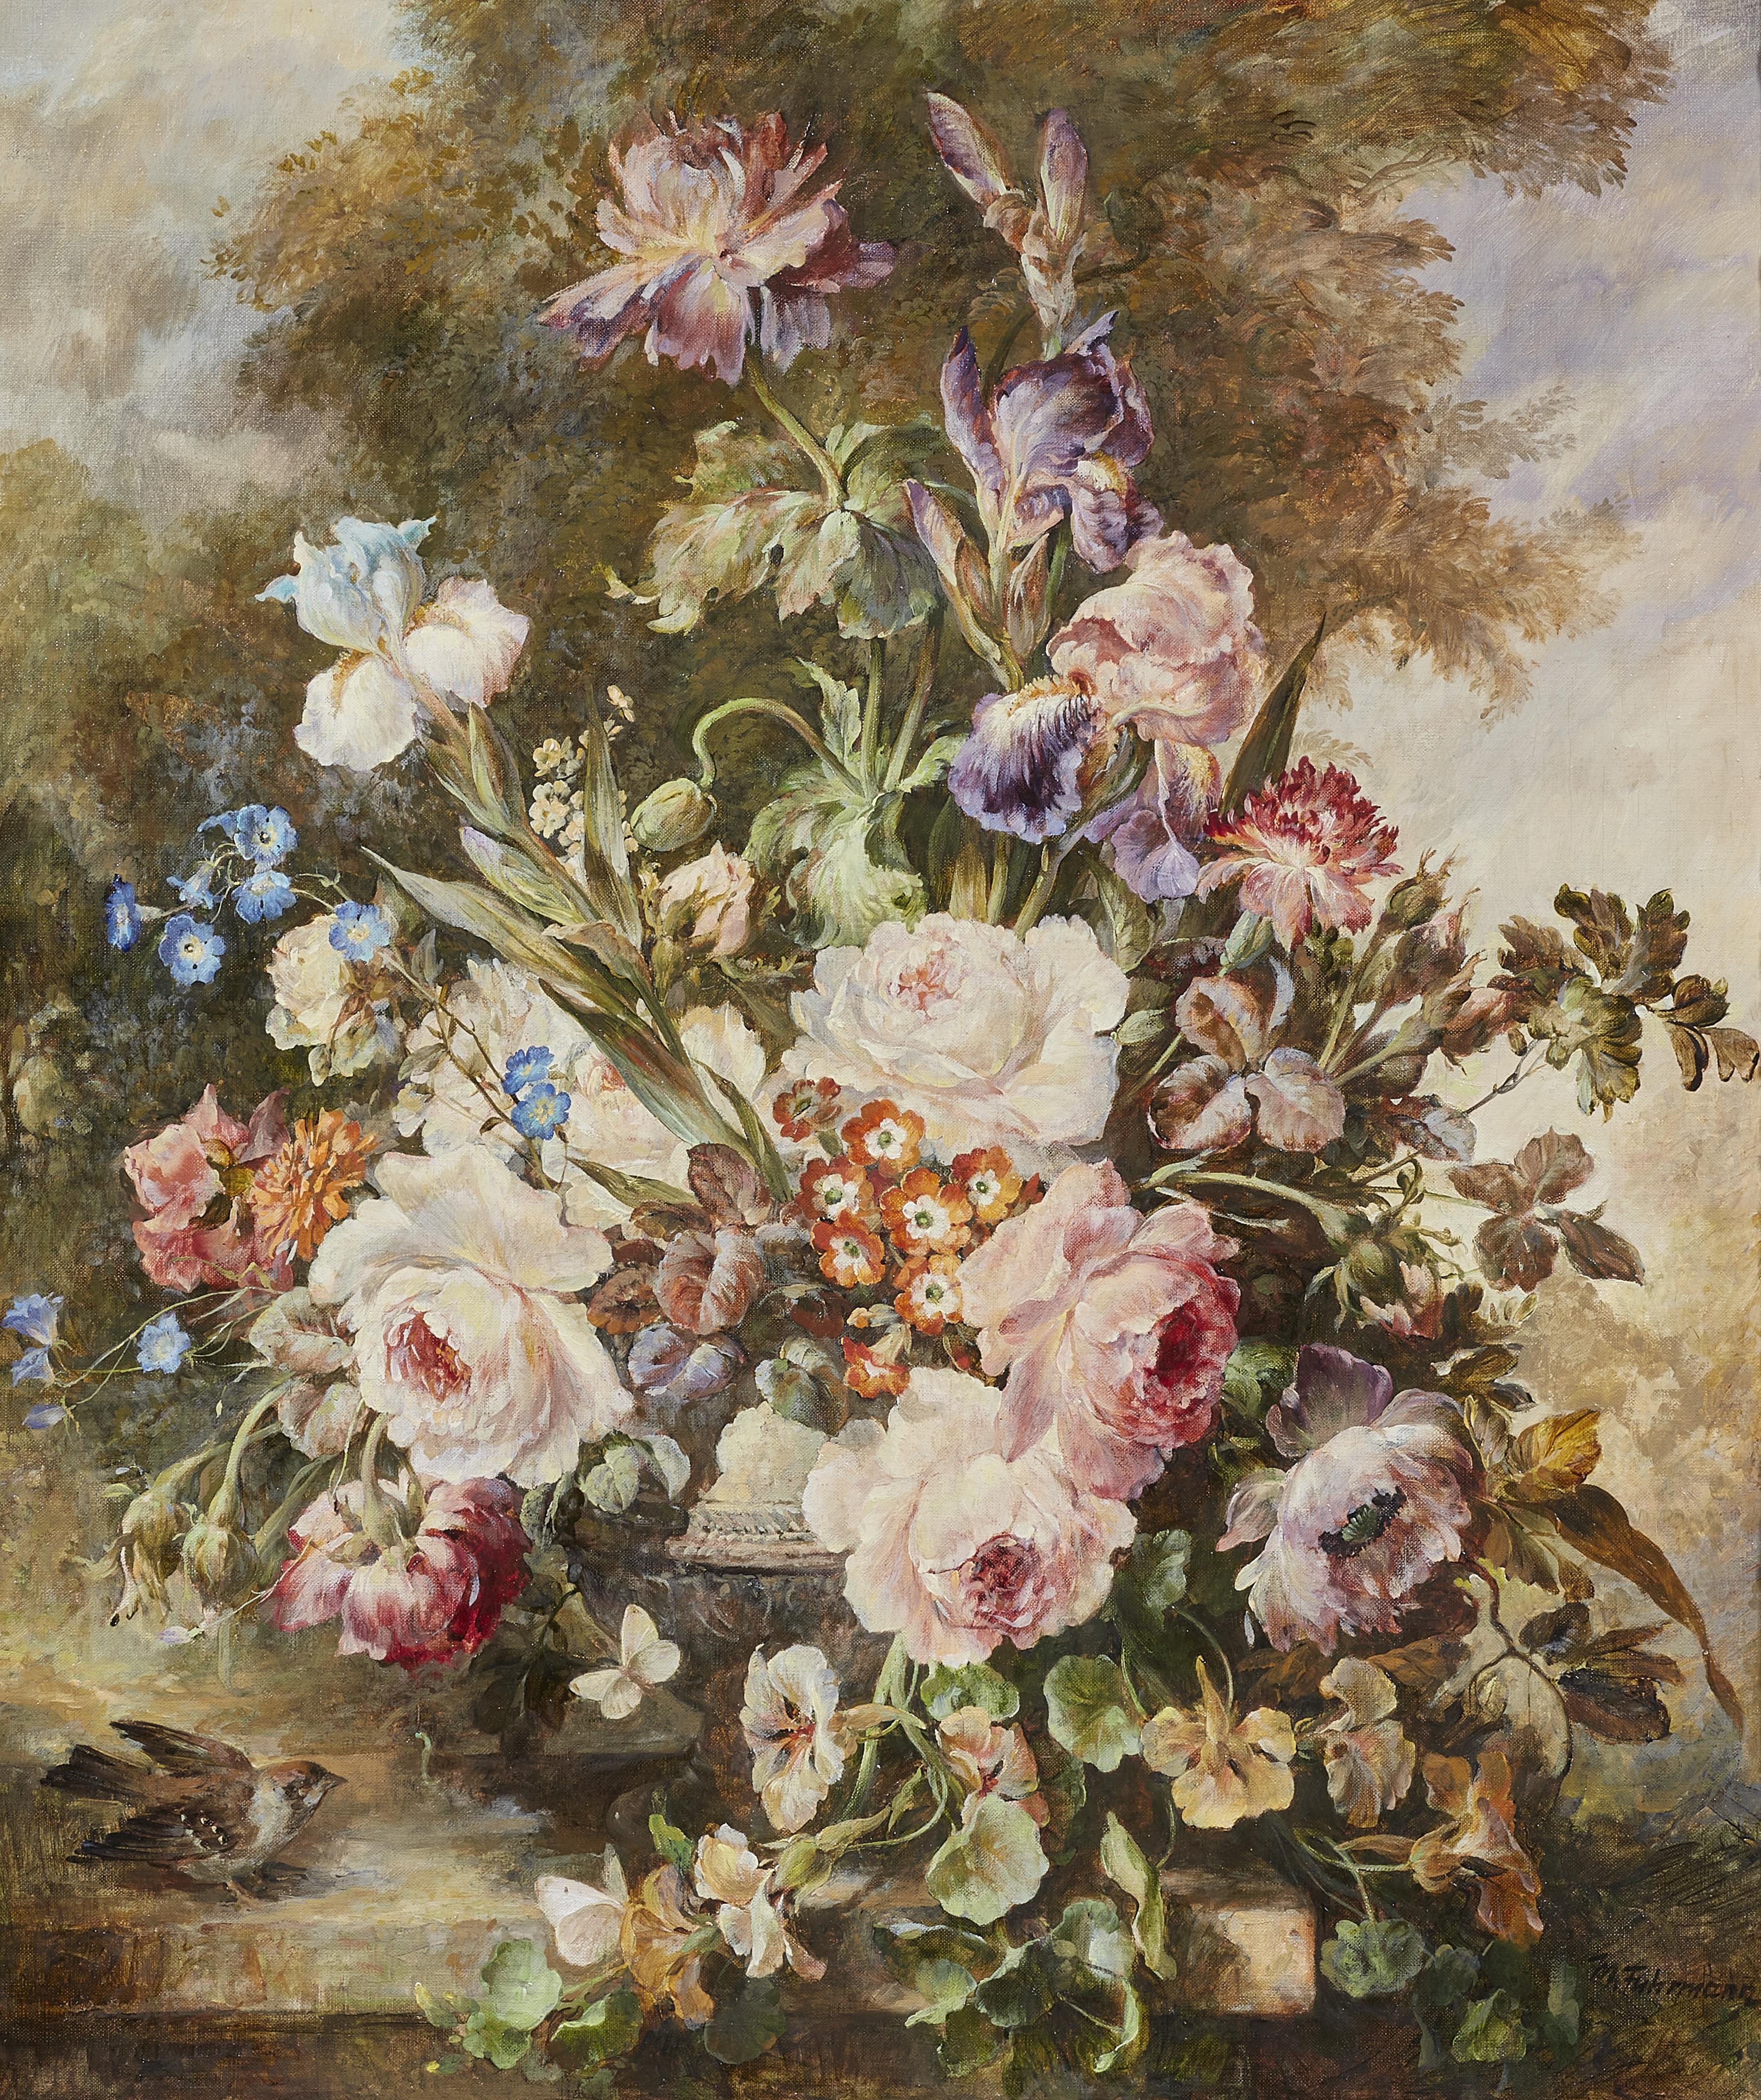 Max Fuhrmann - Bouquet with Peonies, Iris, Forget-Me-Nots and Nasturtiums in a Landscape - image-1